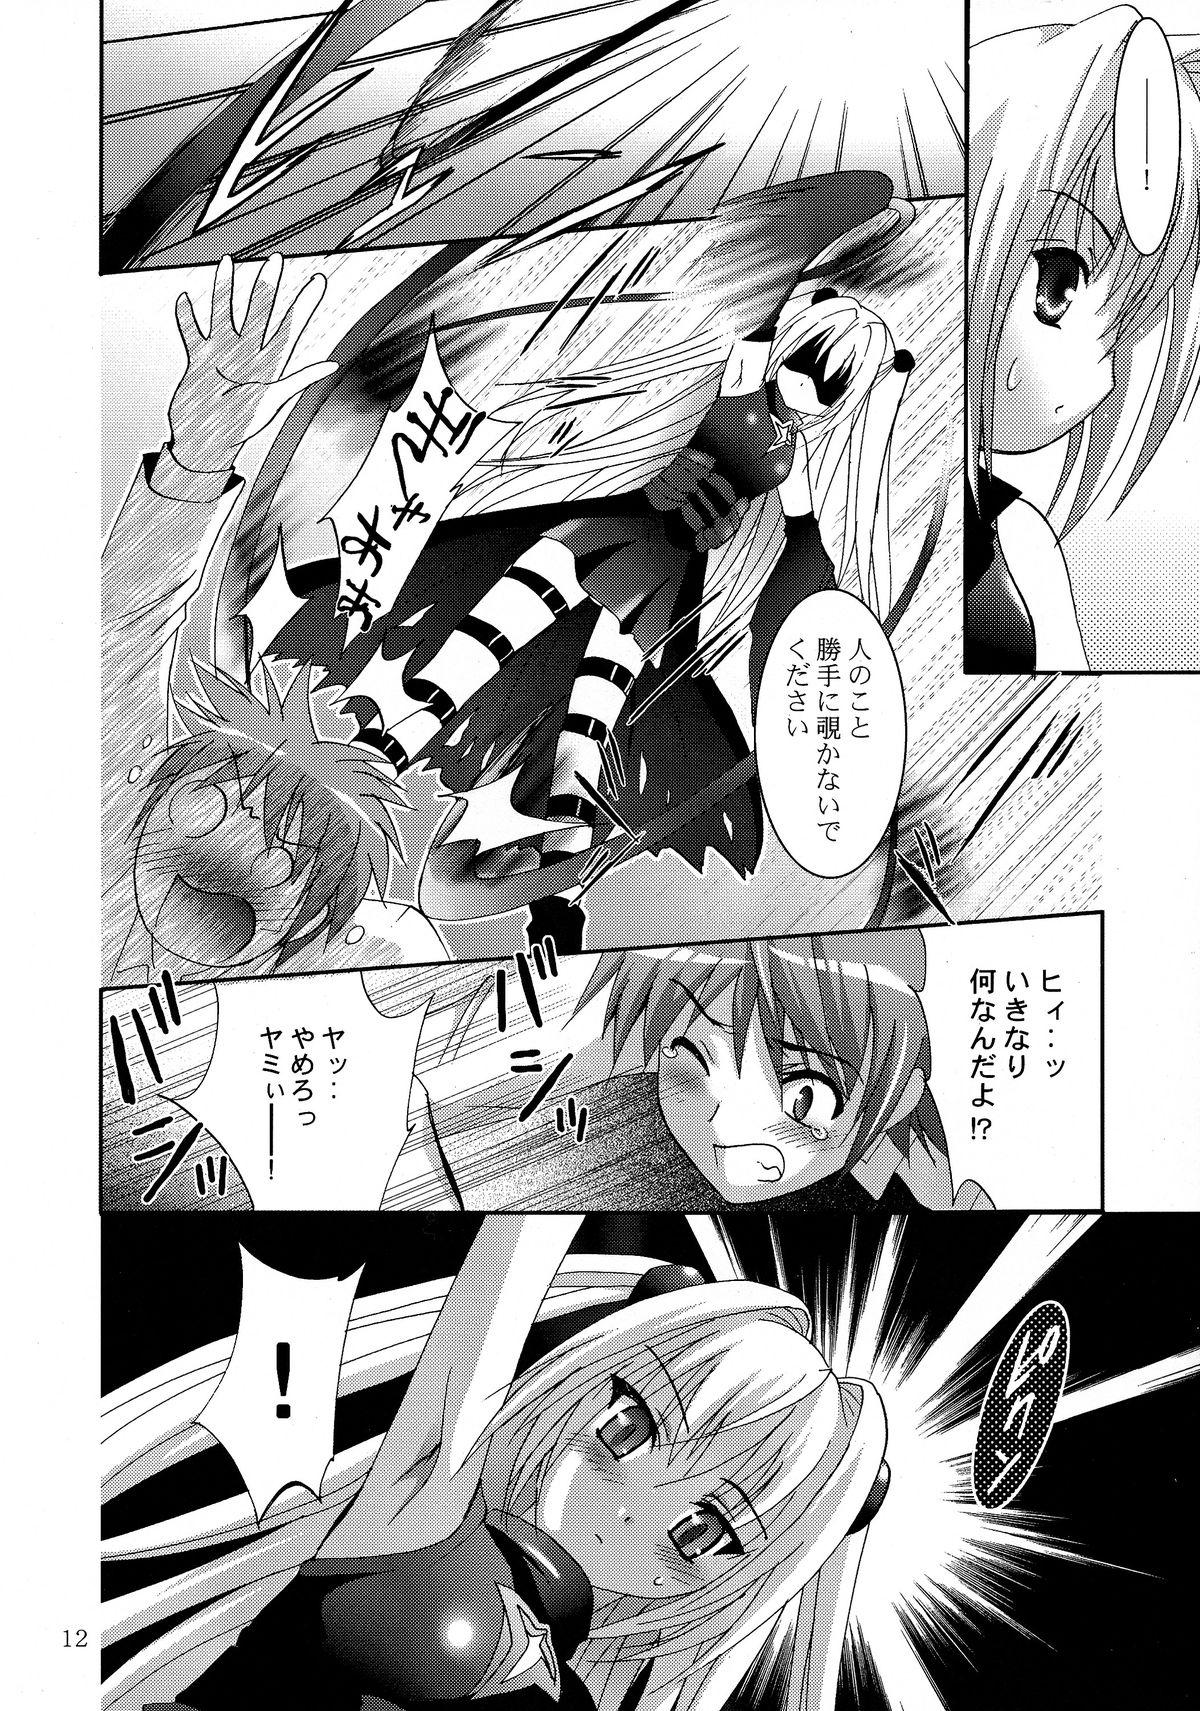 Nice Tits Mousou Mini Theater 23 - To love-ru Public Nudity - Page 12